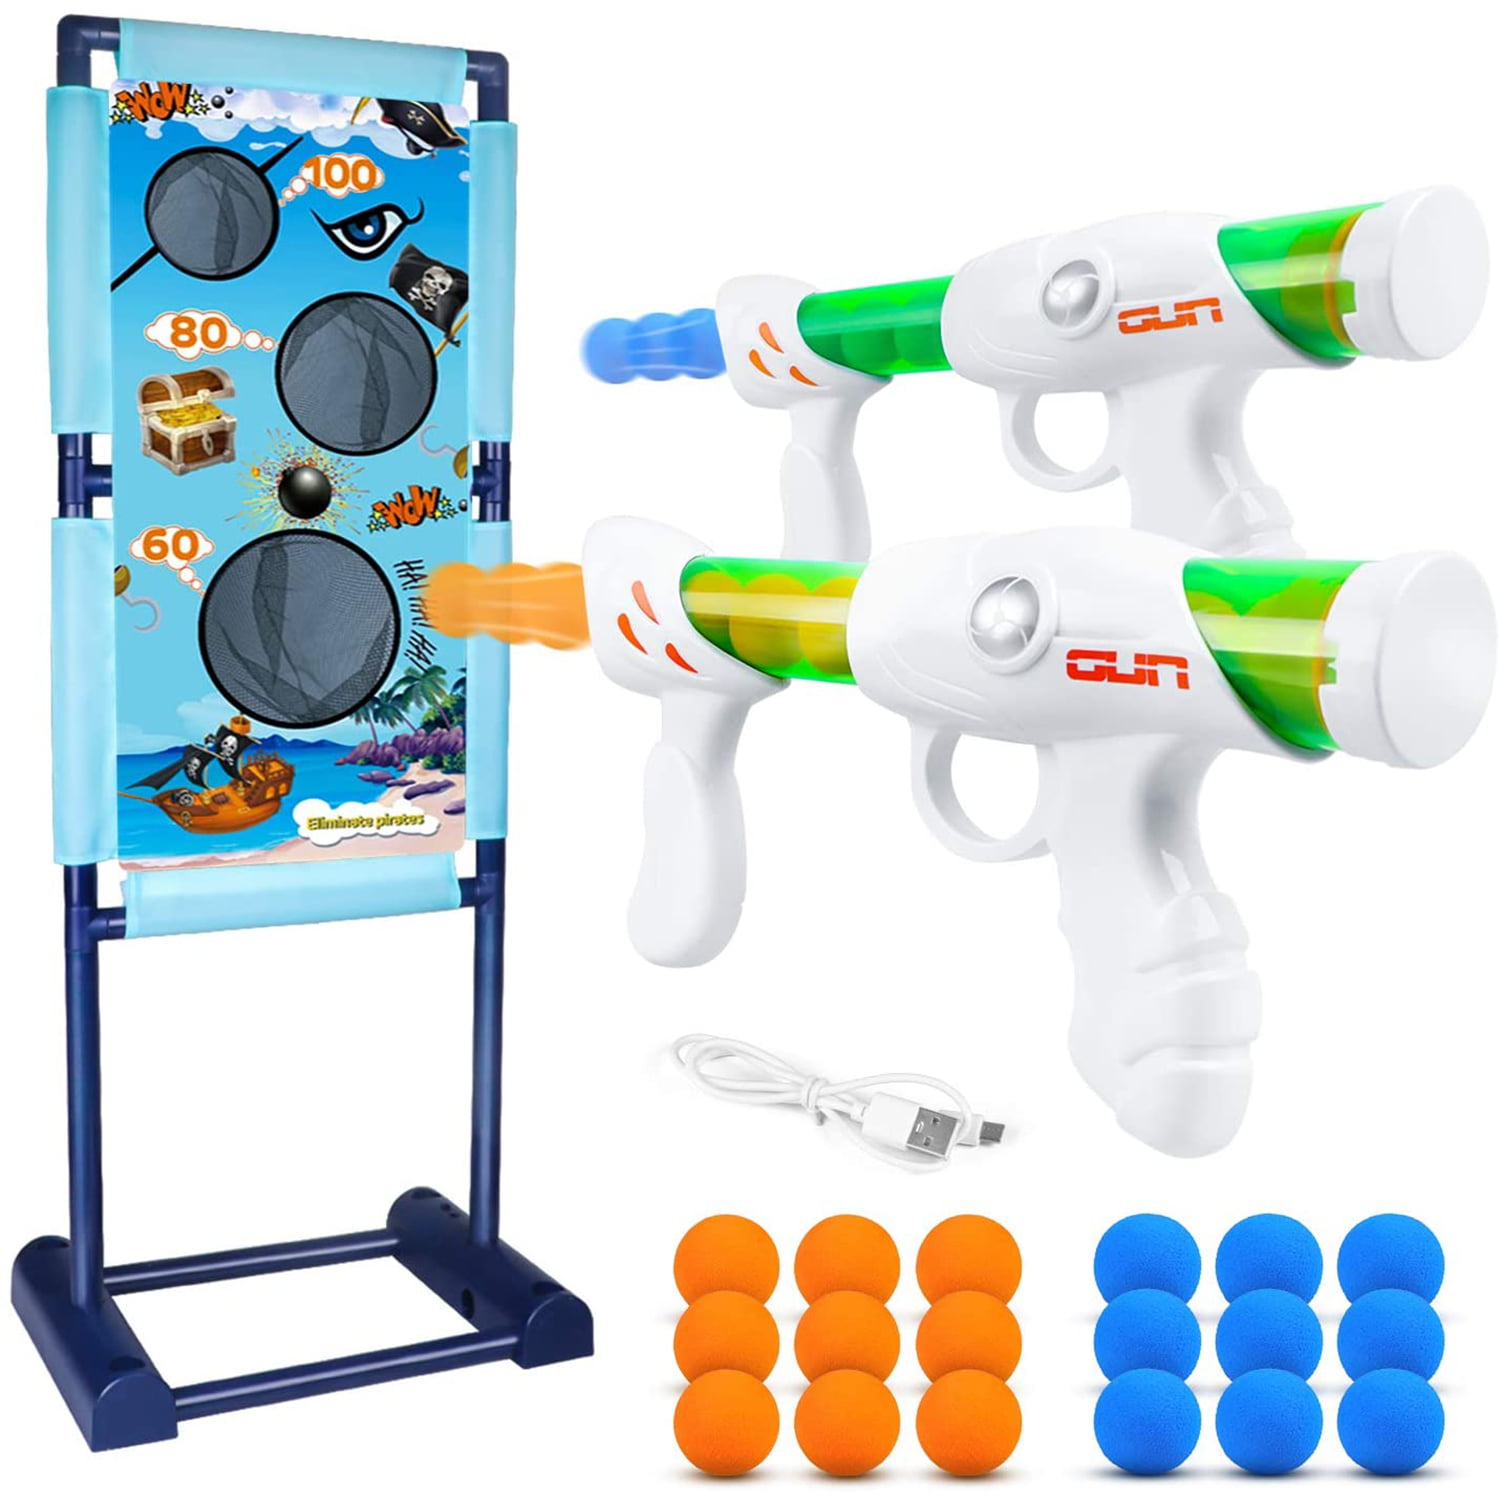 Play 2 Toy Guns Plastic Ball toy Shooter Easy Spring action Ages 3 NEW 6 oz. 